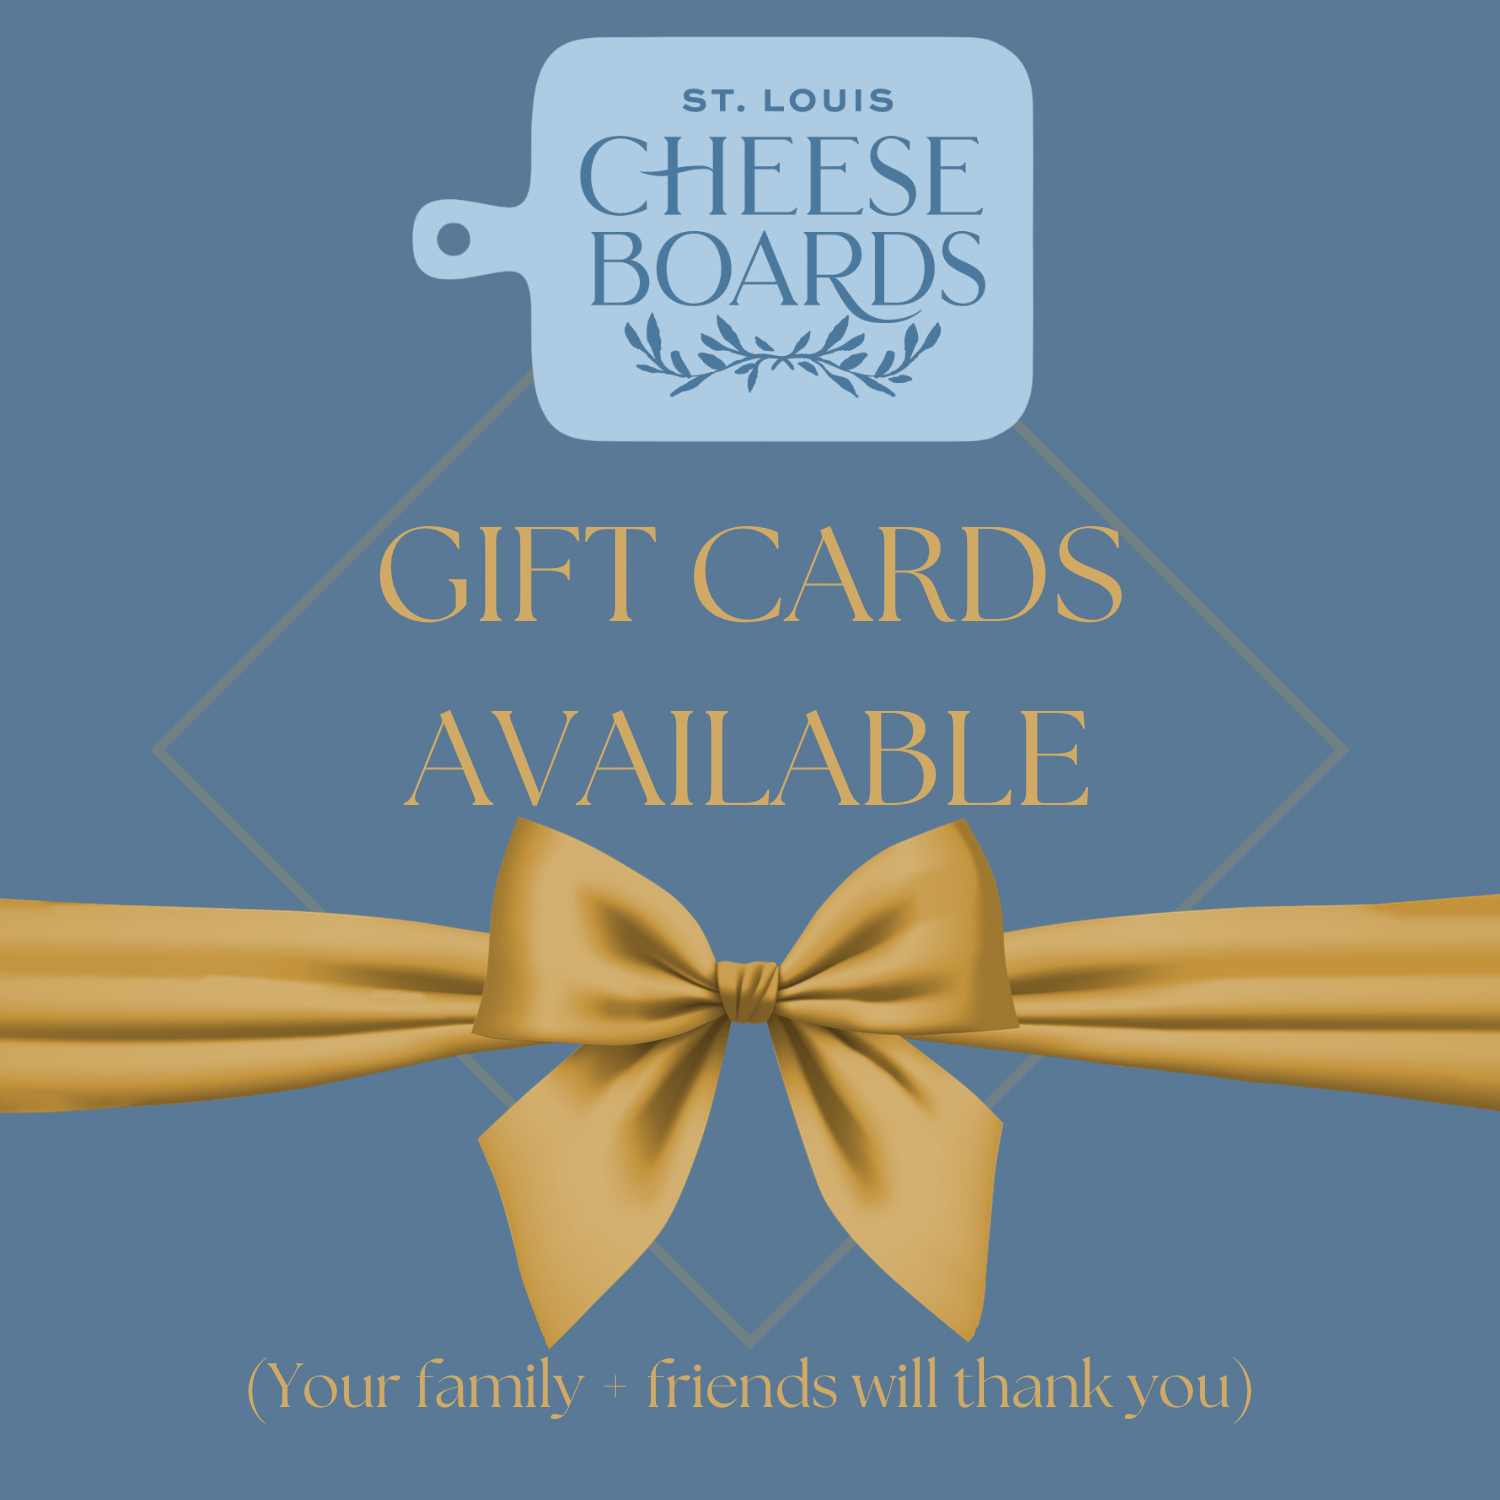 St. Louis Cheese Board Gift Card